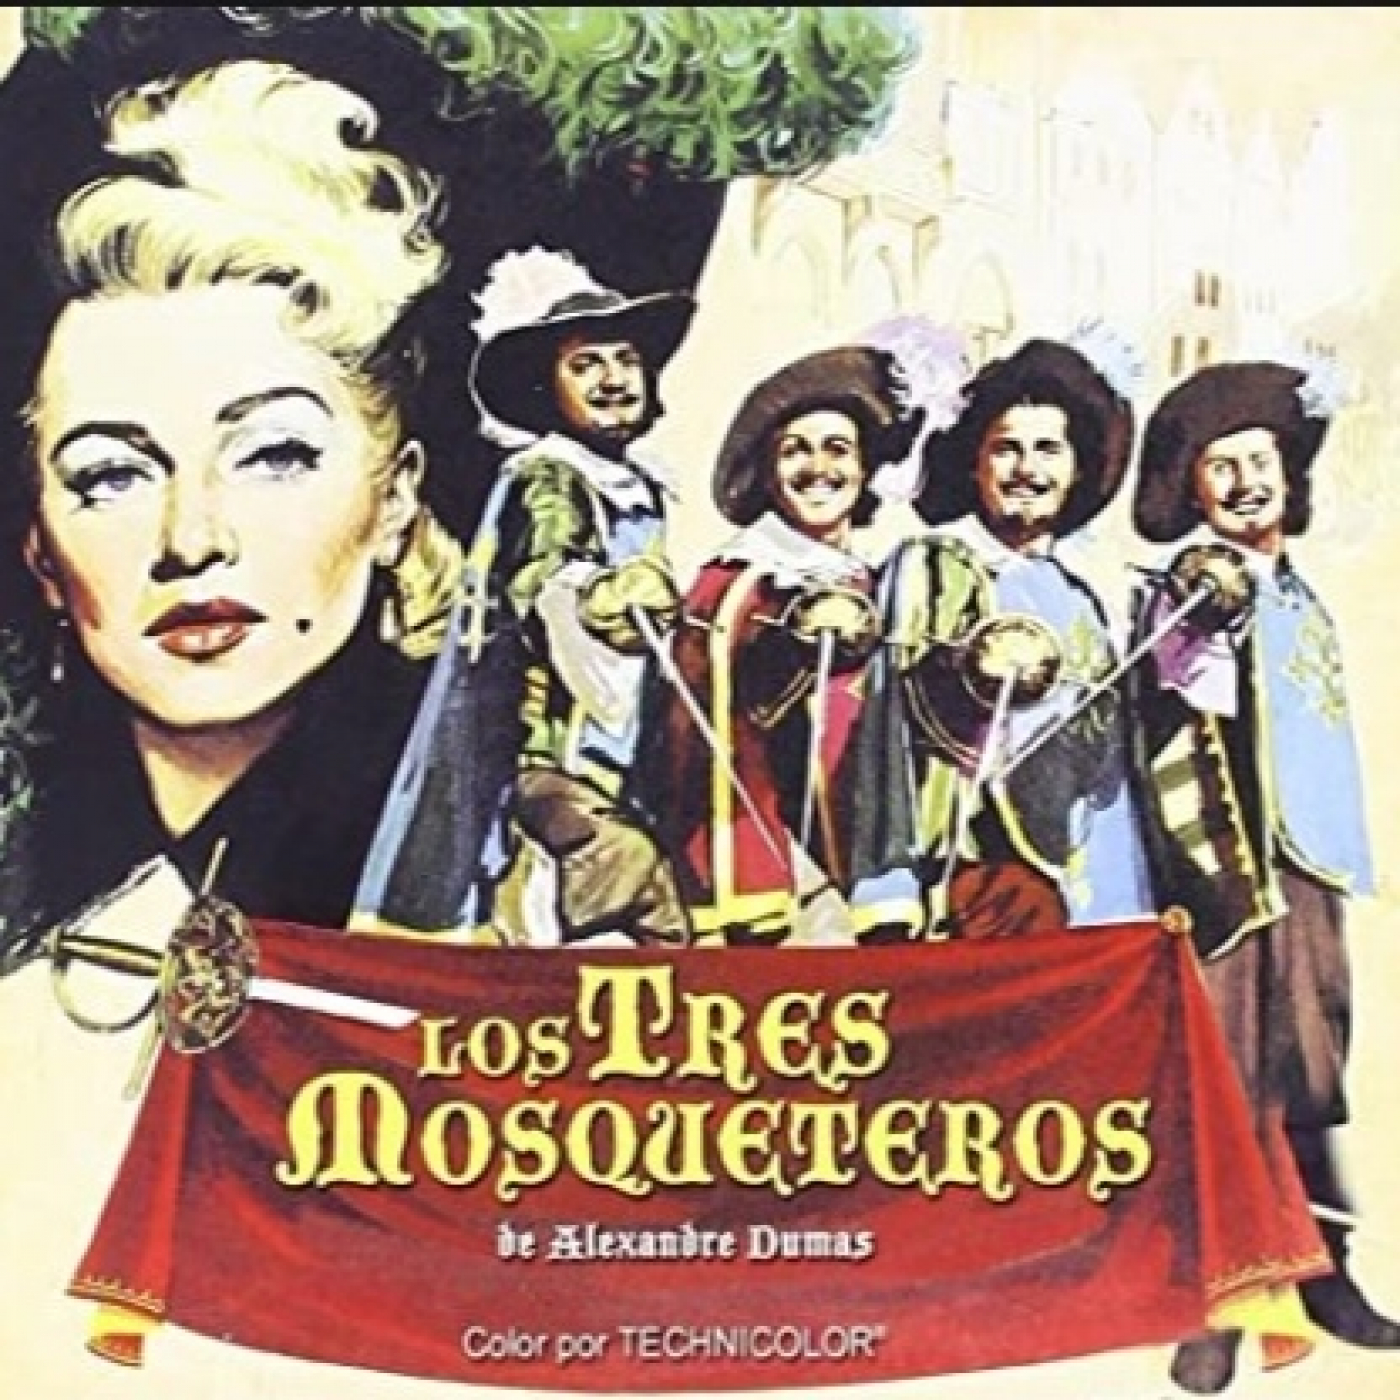 2x75.-The Three Musketeers - 1948